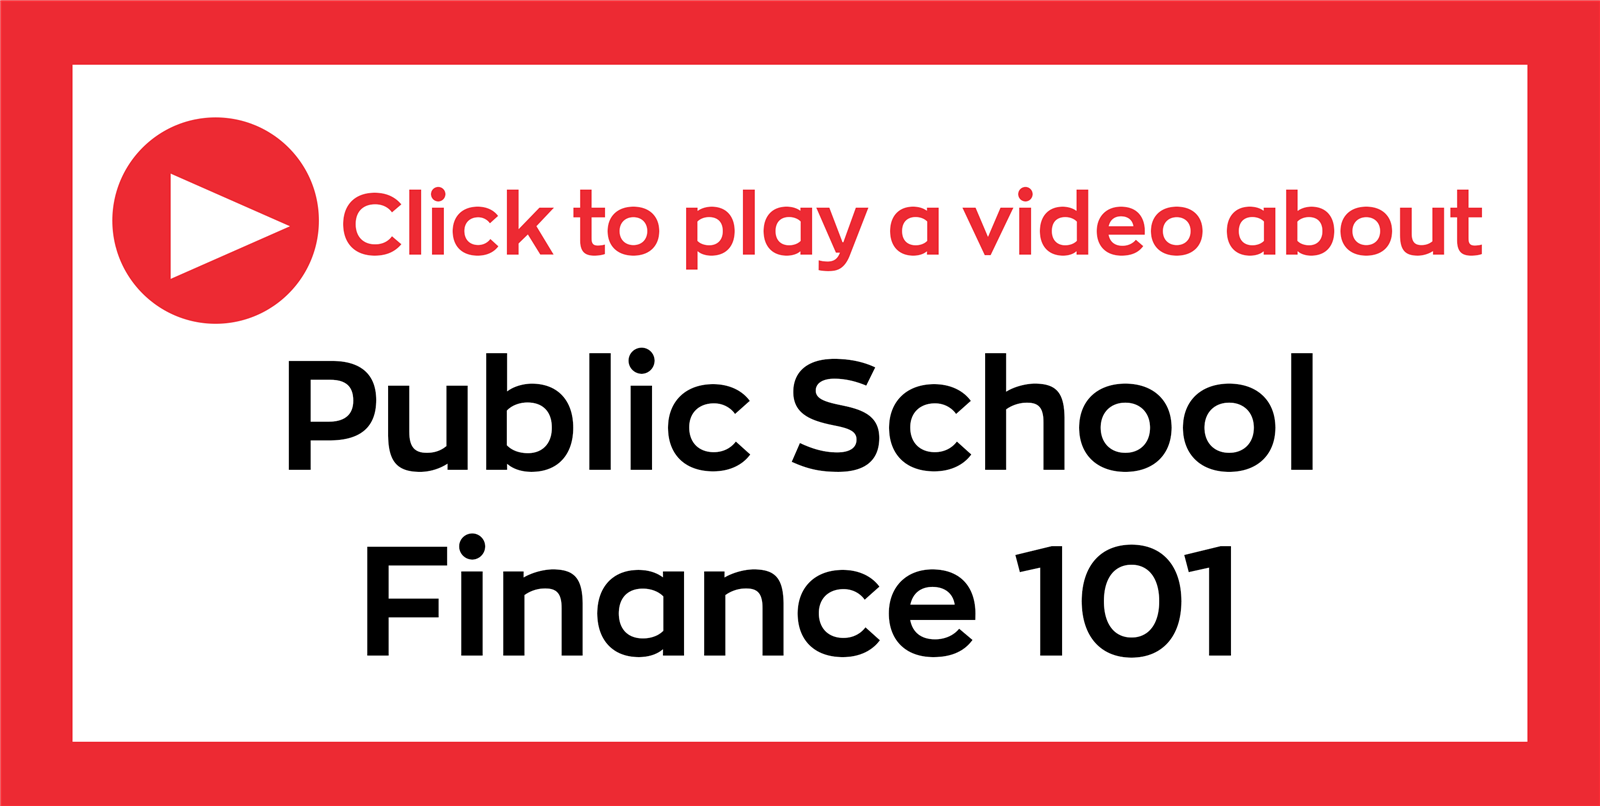 Click to play a video about public school finance 101